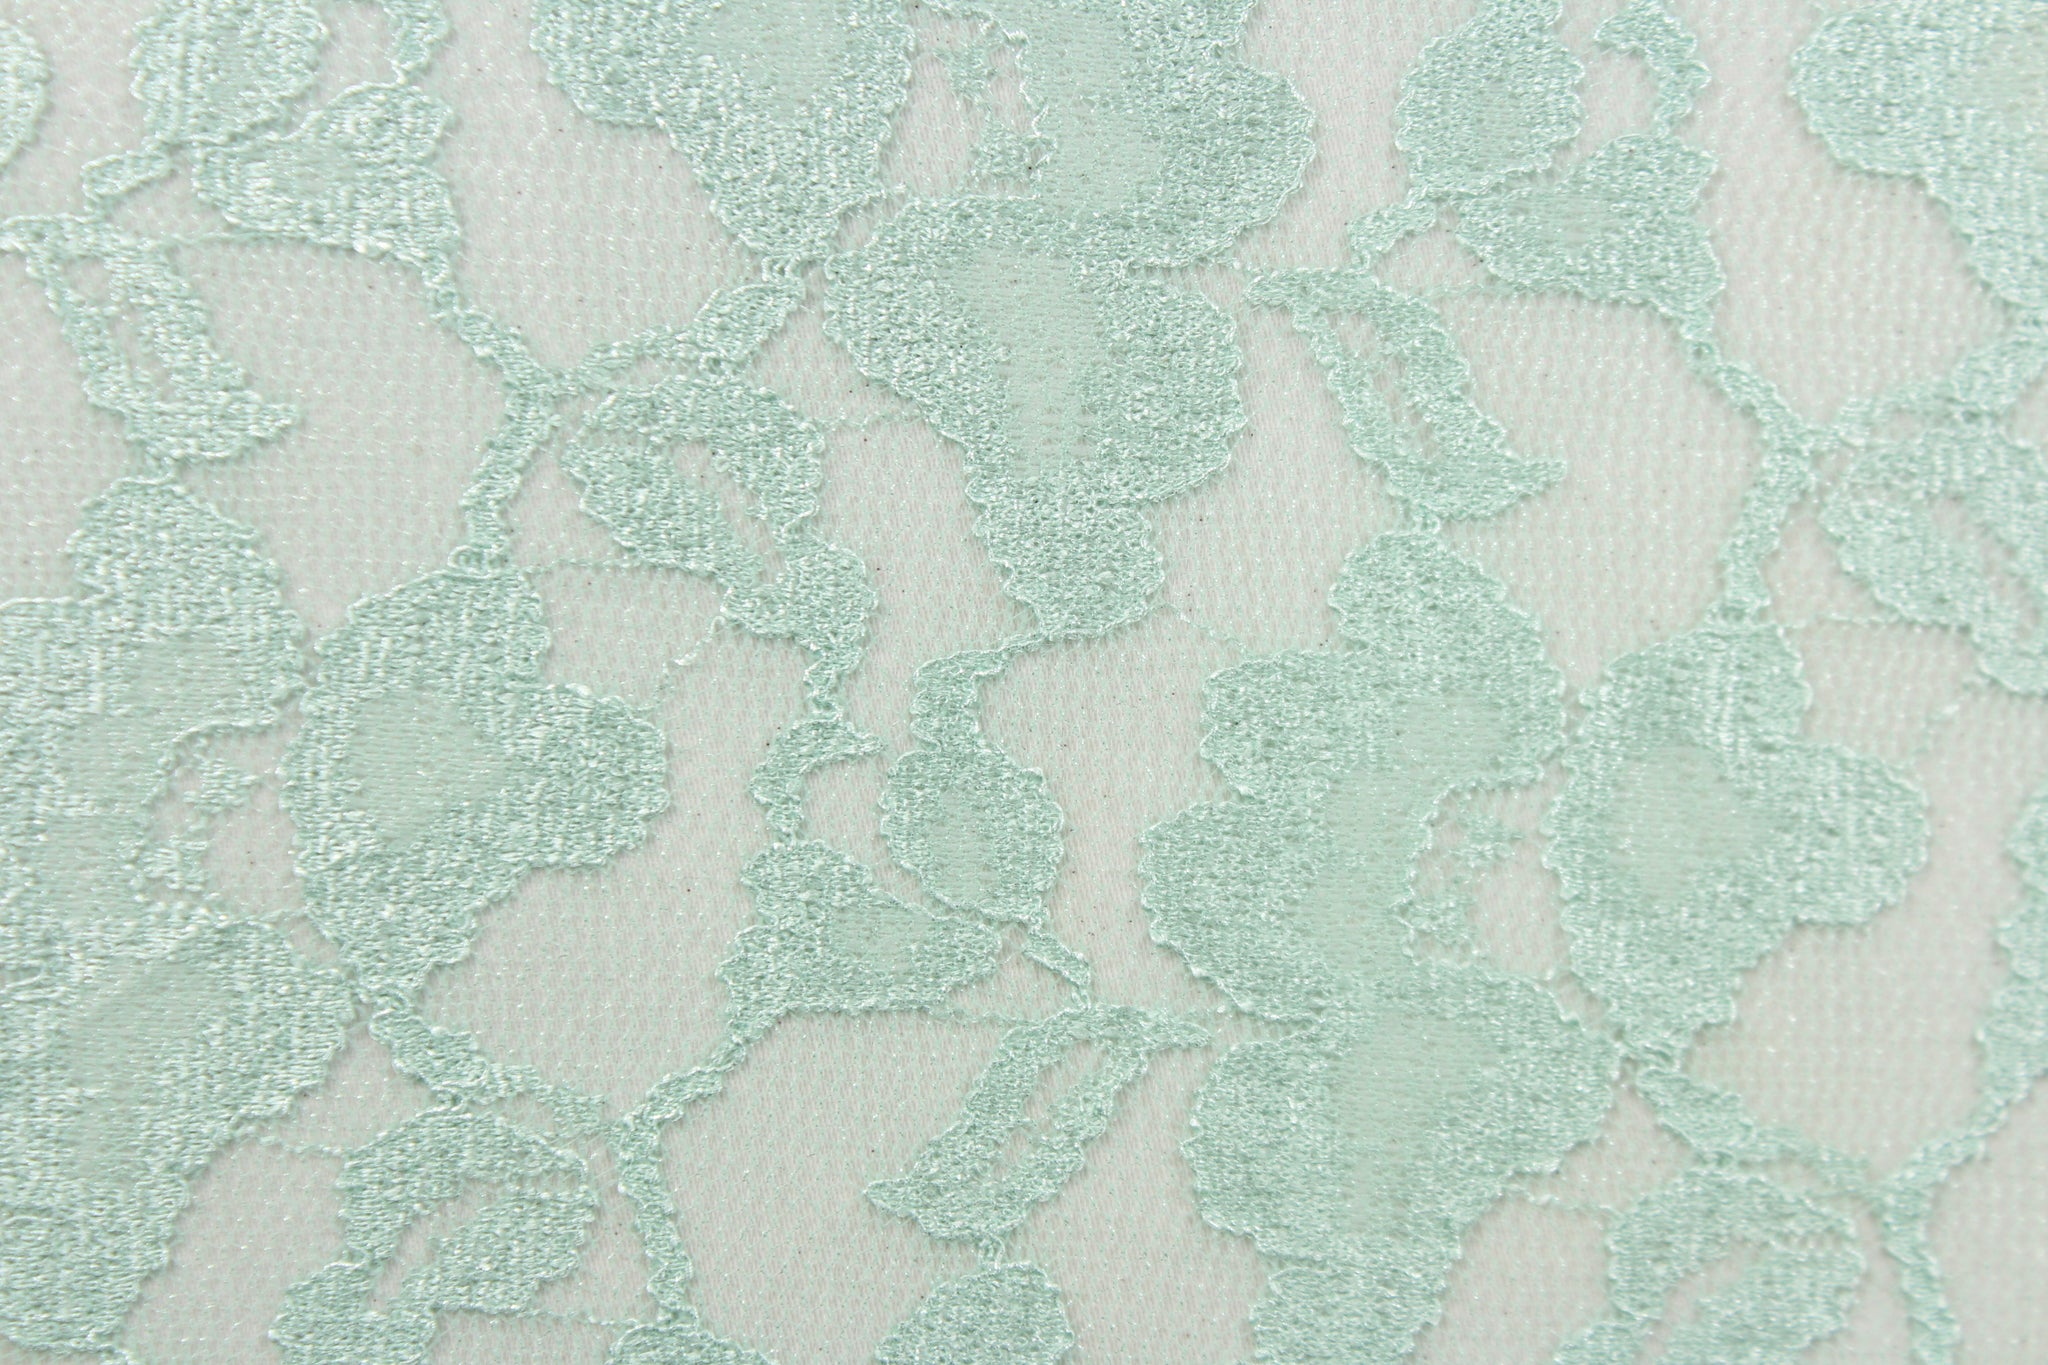 Clearance Stretch Lace 31 - 5.5 Mint Green 1 LEFT